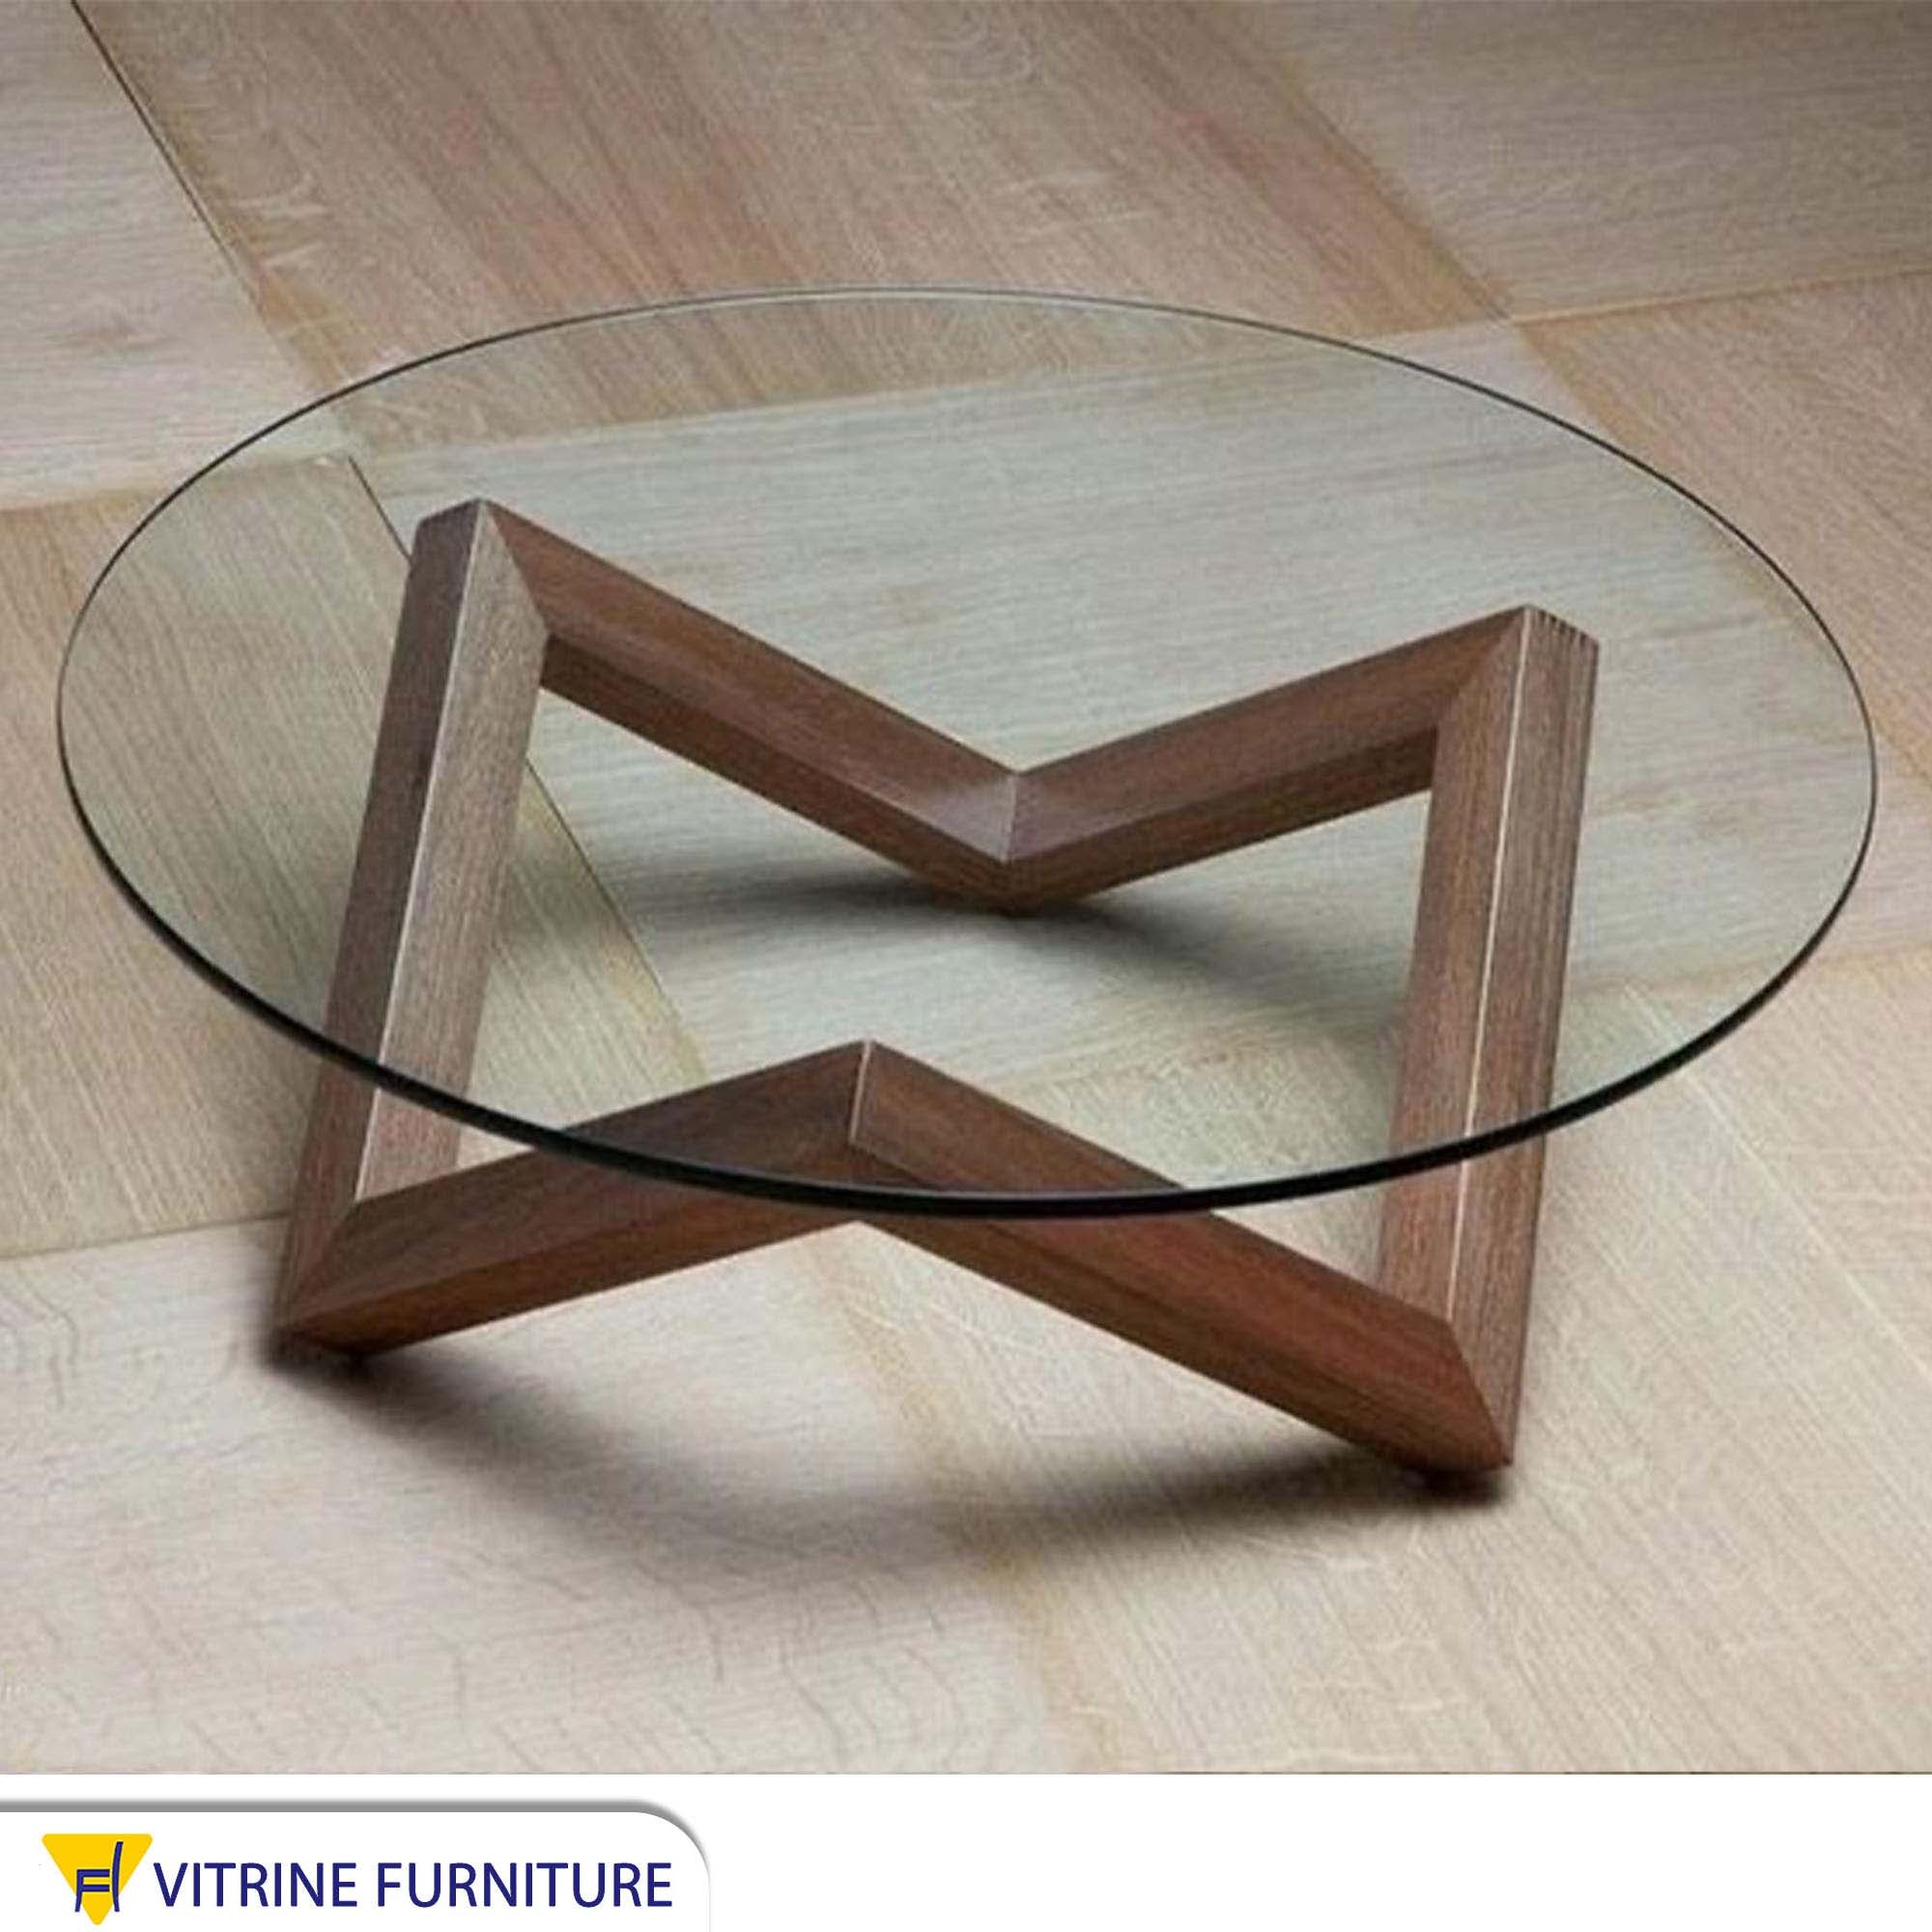 Circular table with glass top